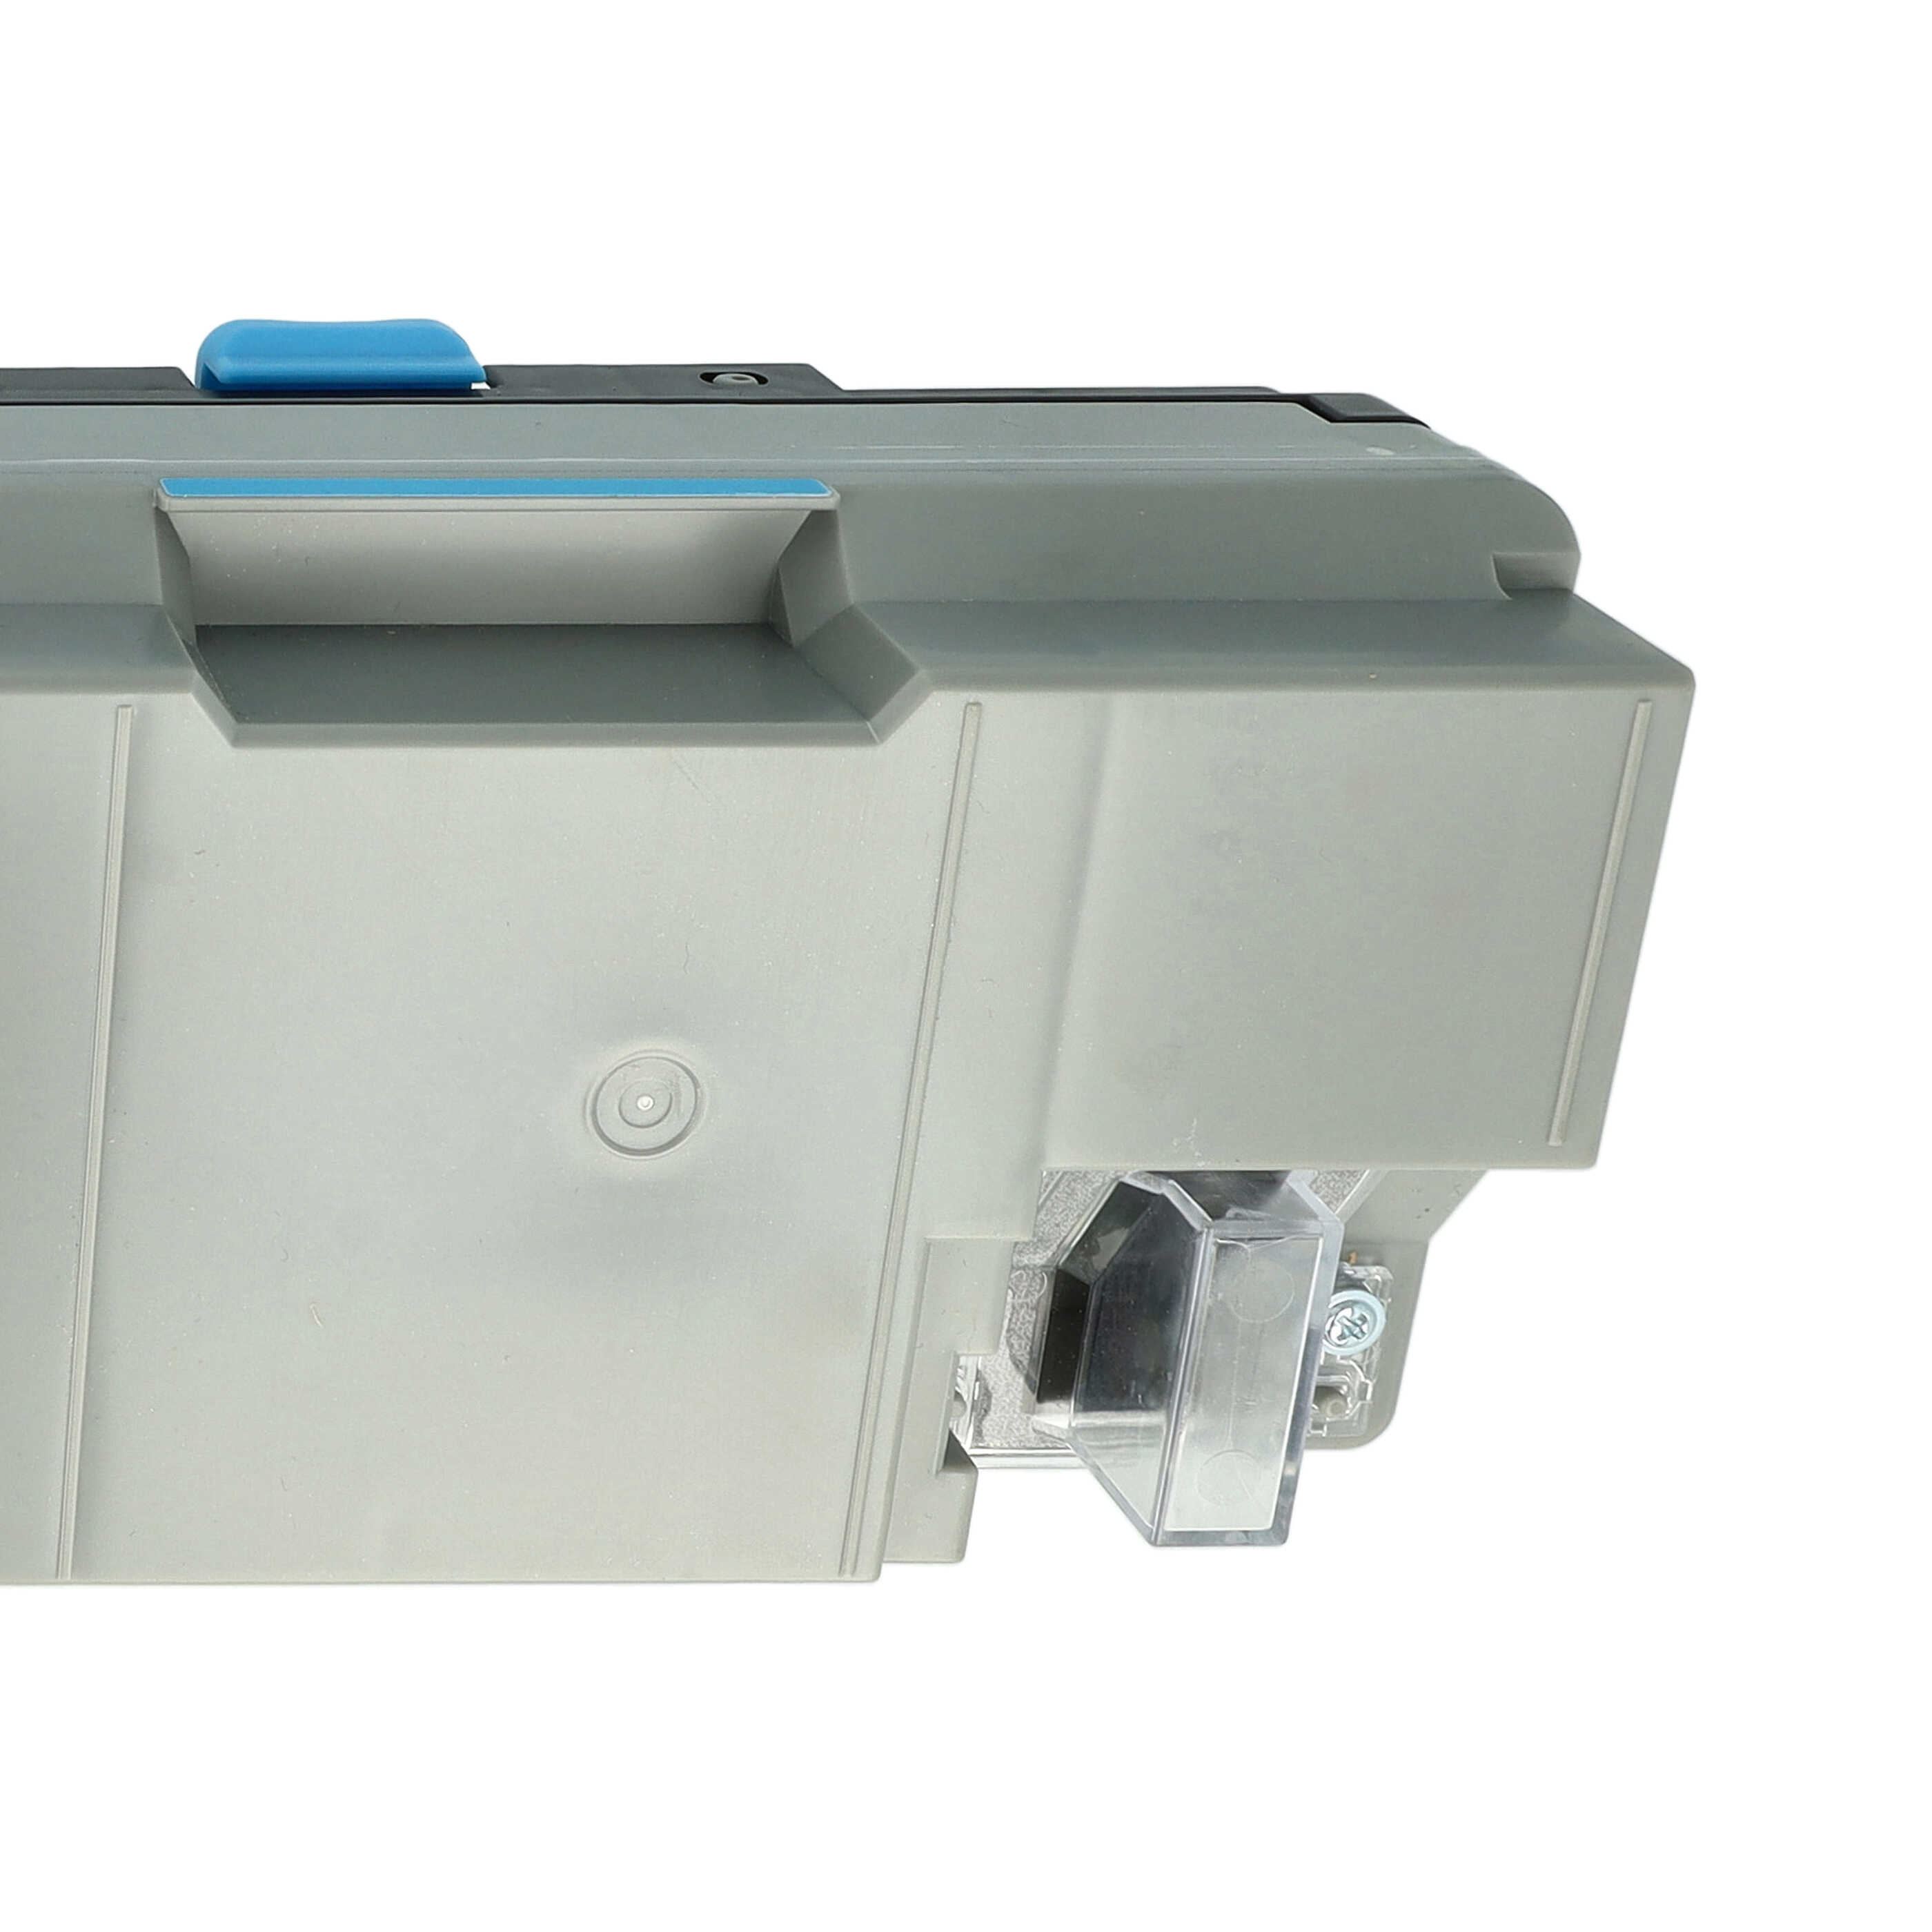 Waste Toner Container as Replacement for Konica Minoltagrey